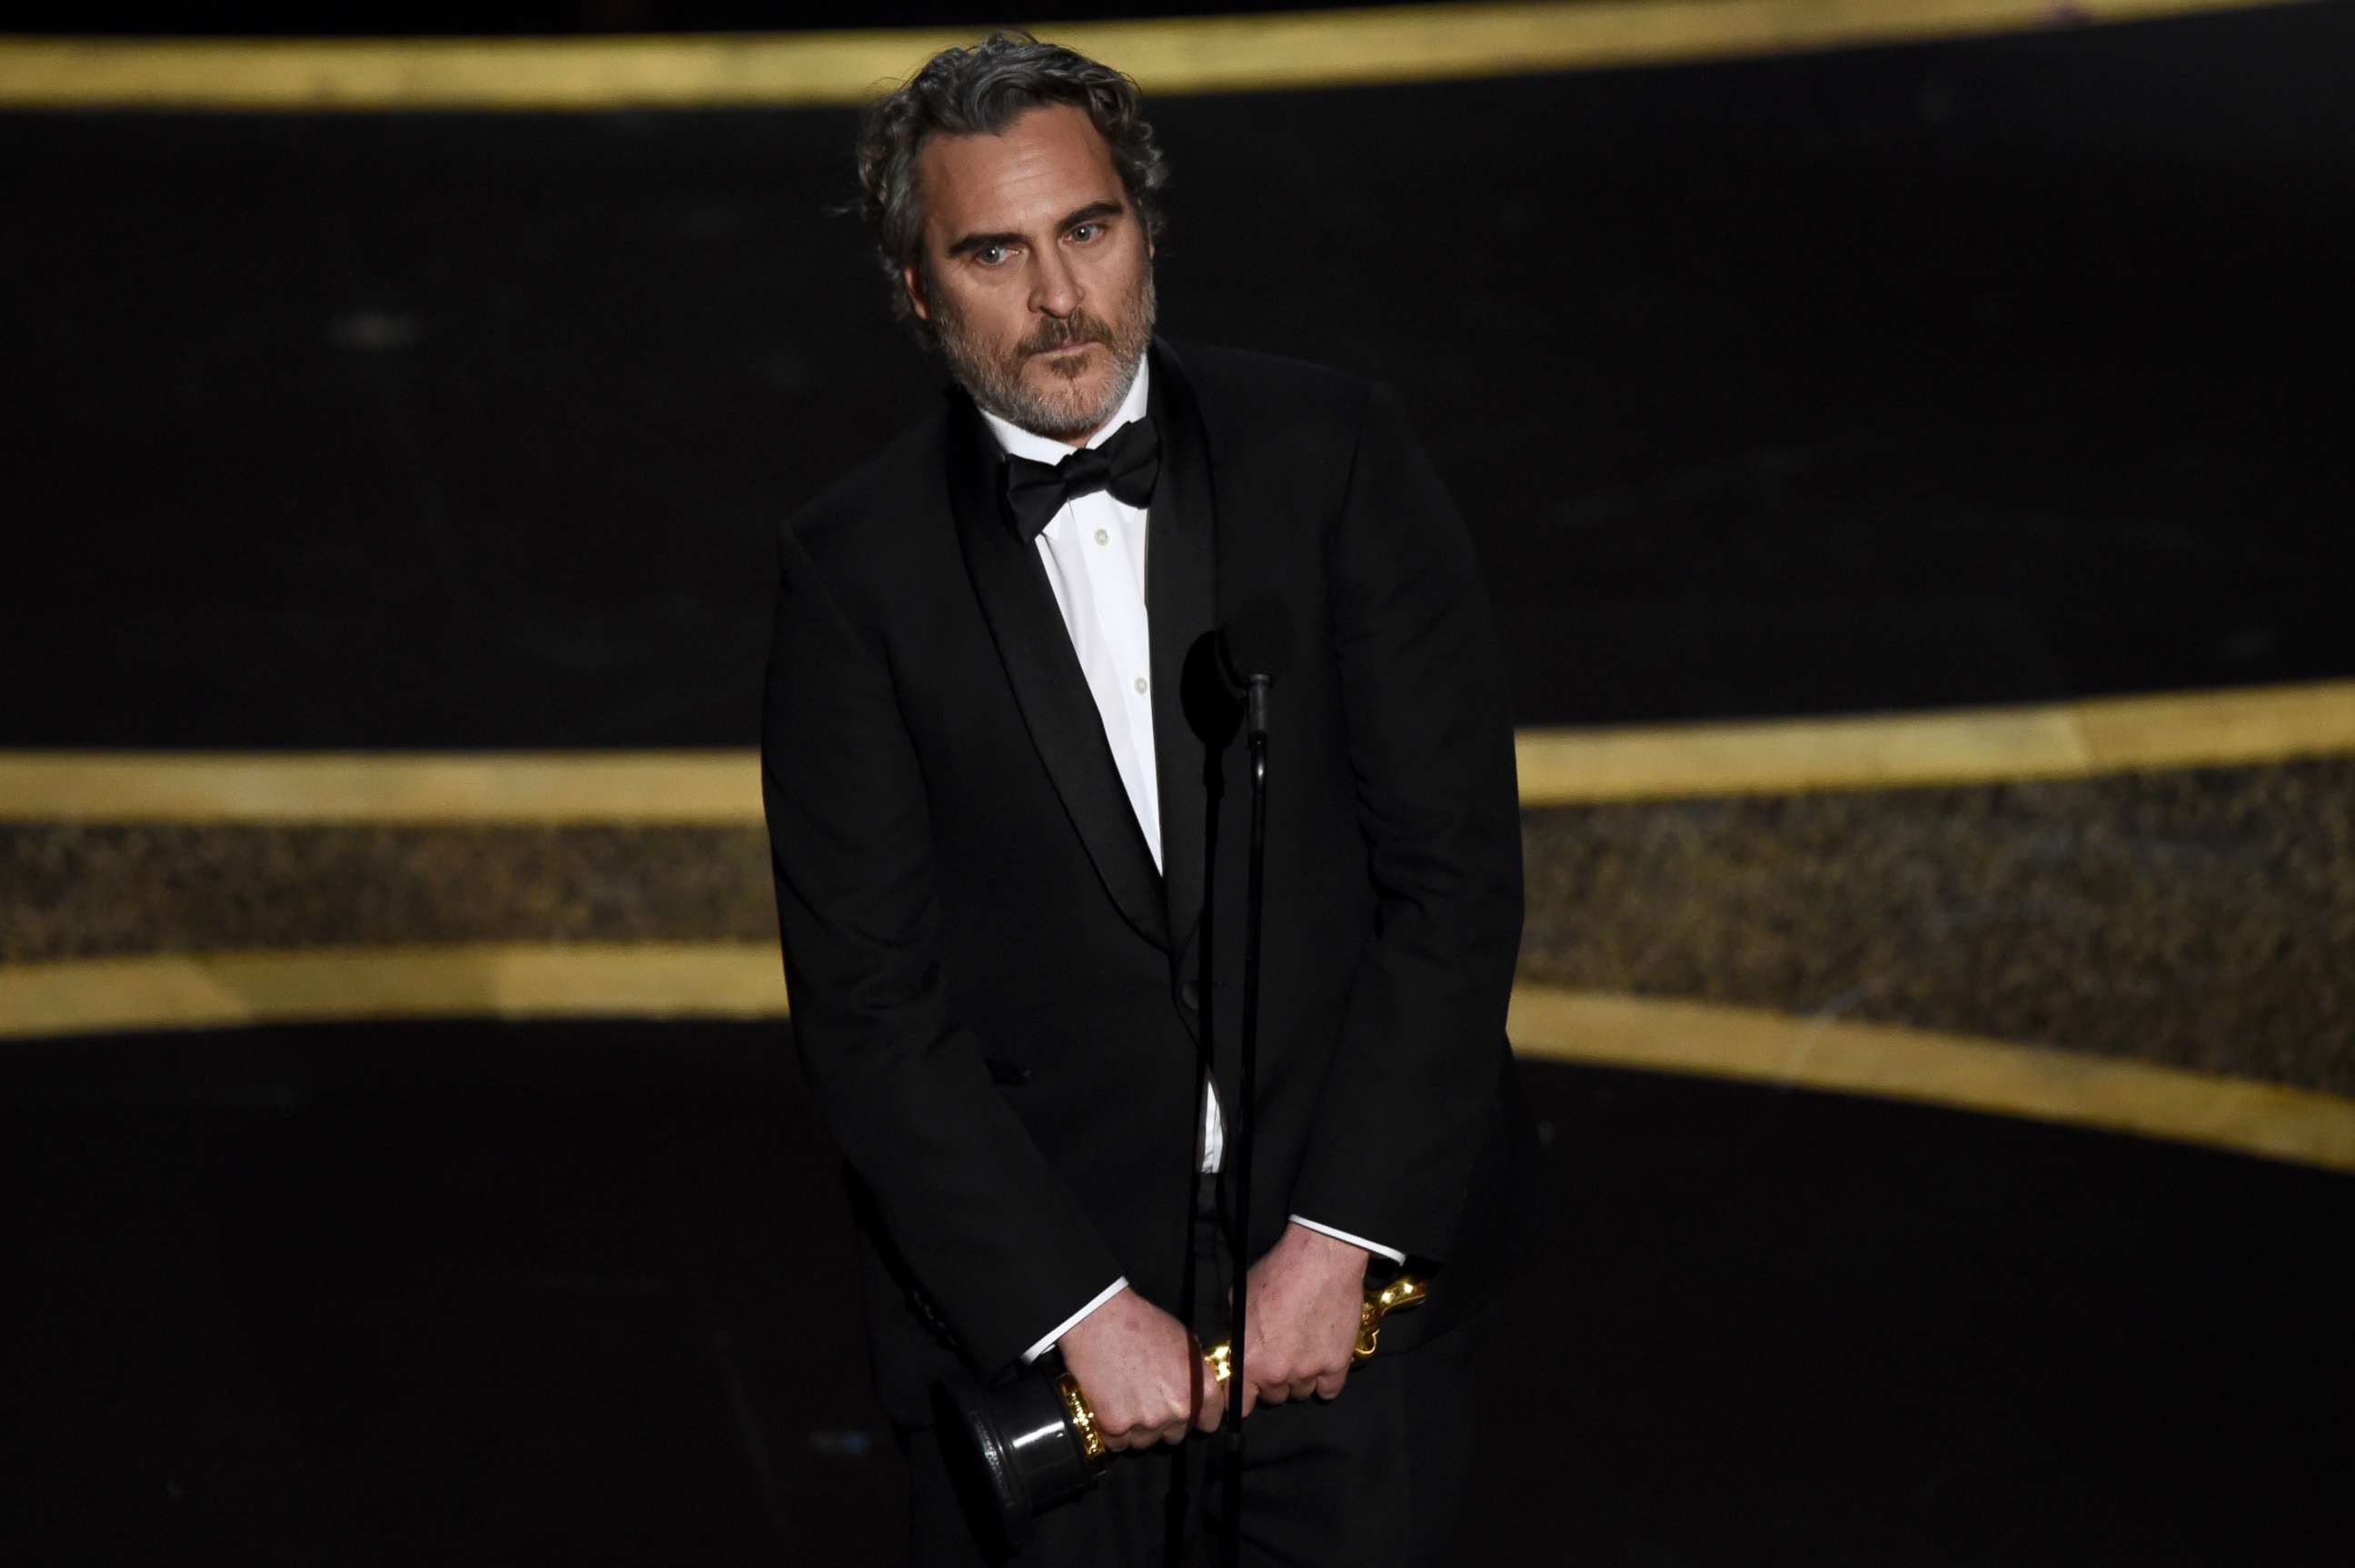 PHOTO: Joaquin Phoenix reacts as he accepts the award for best performance by an actor in a leading role for "Joker" at the Oscars, Feb. 9, 2020, at the Dolby Theatre in Los Angeles.